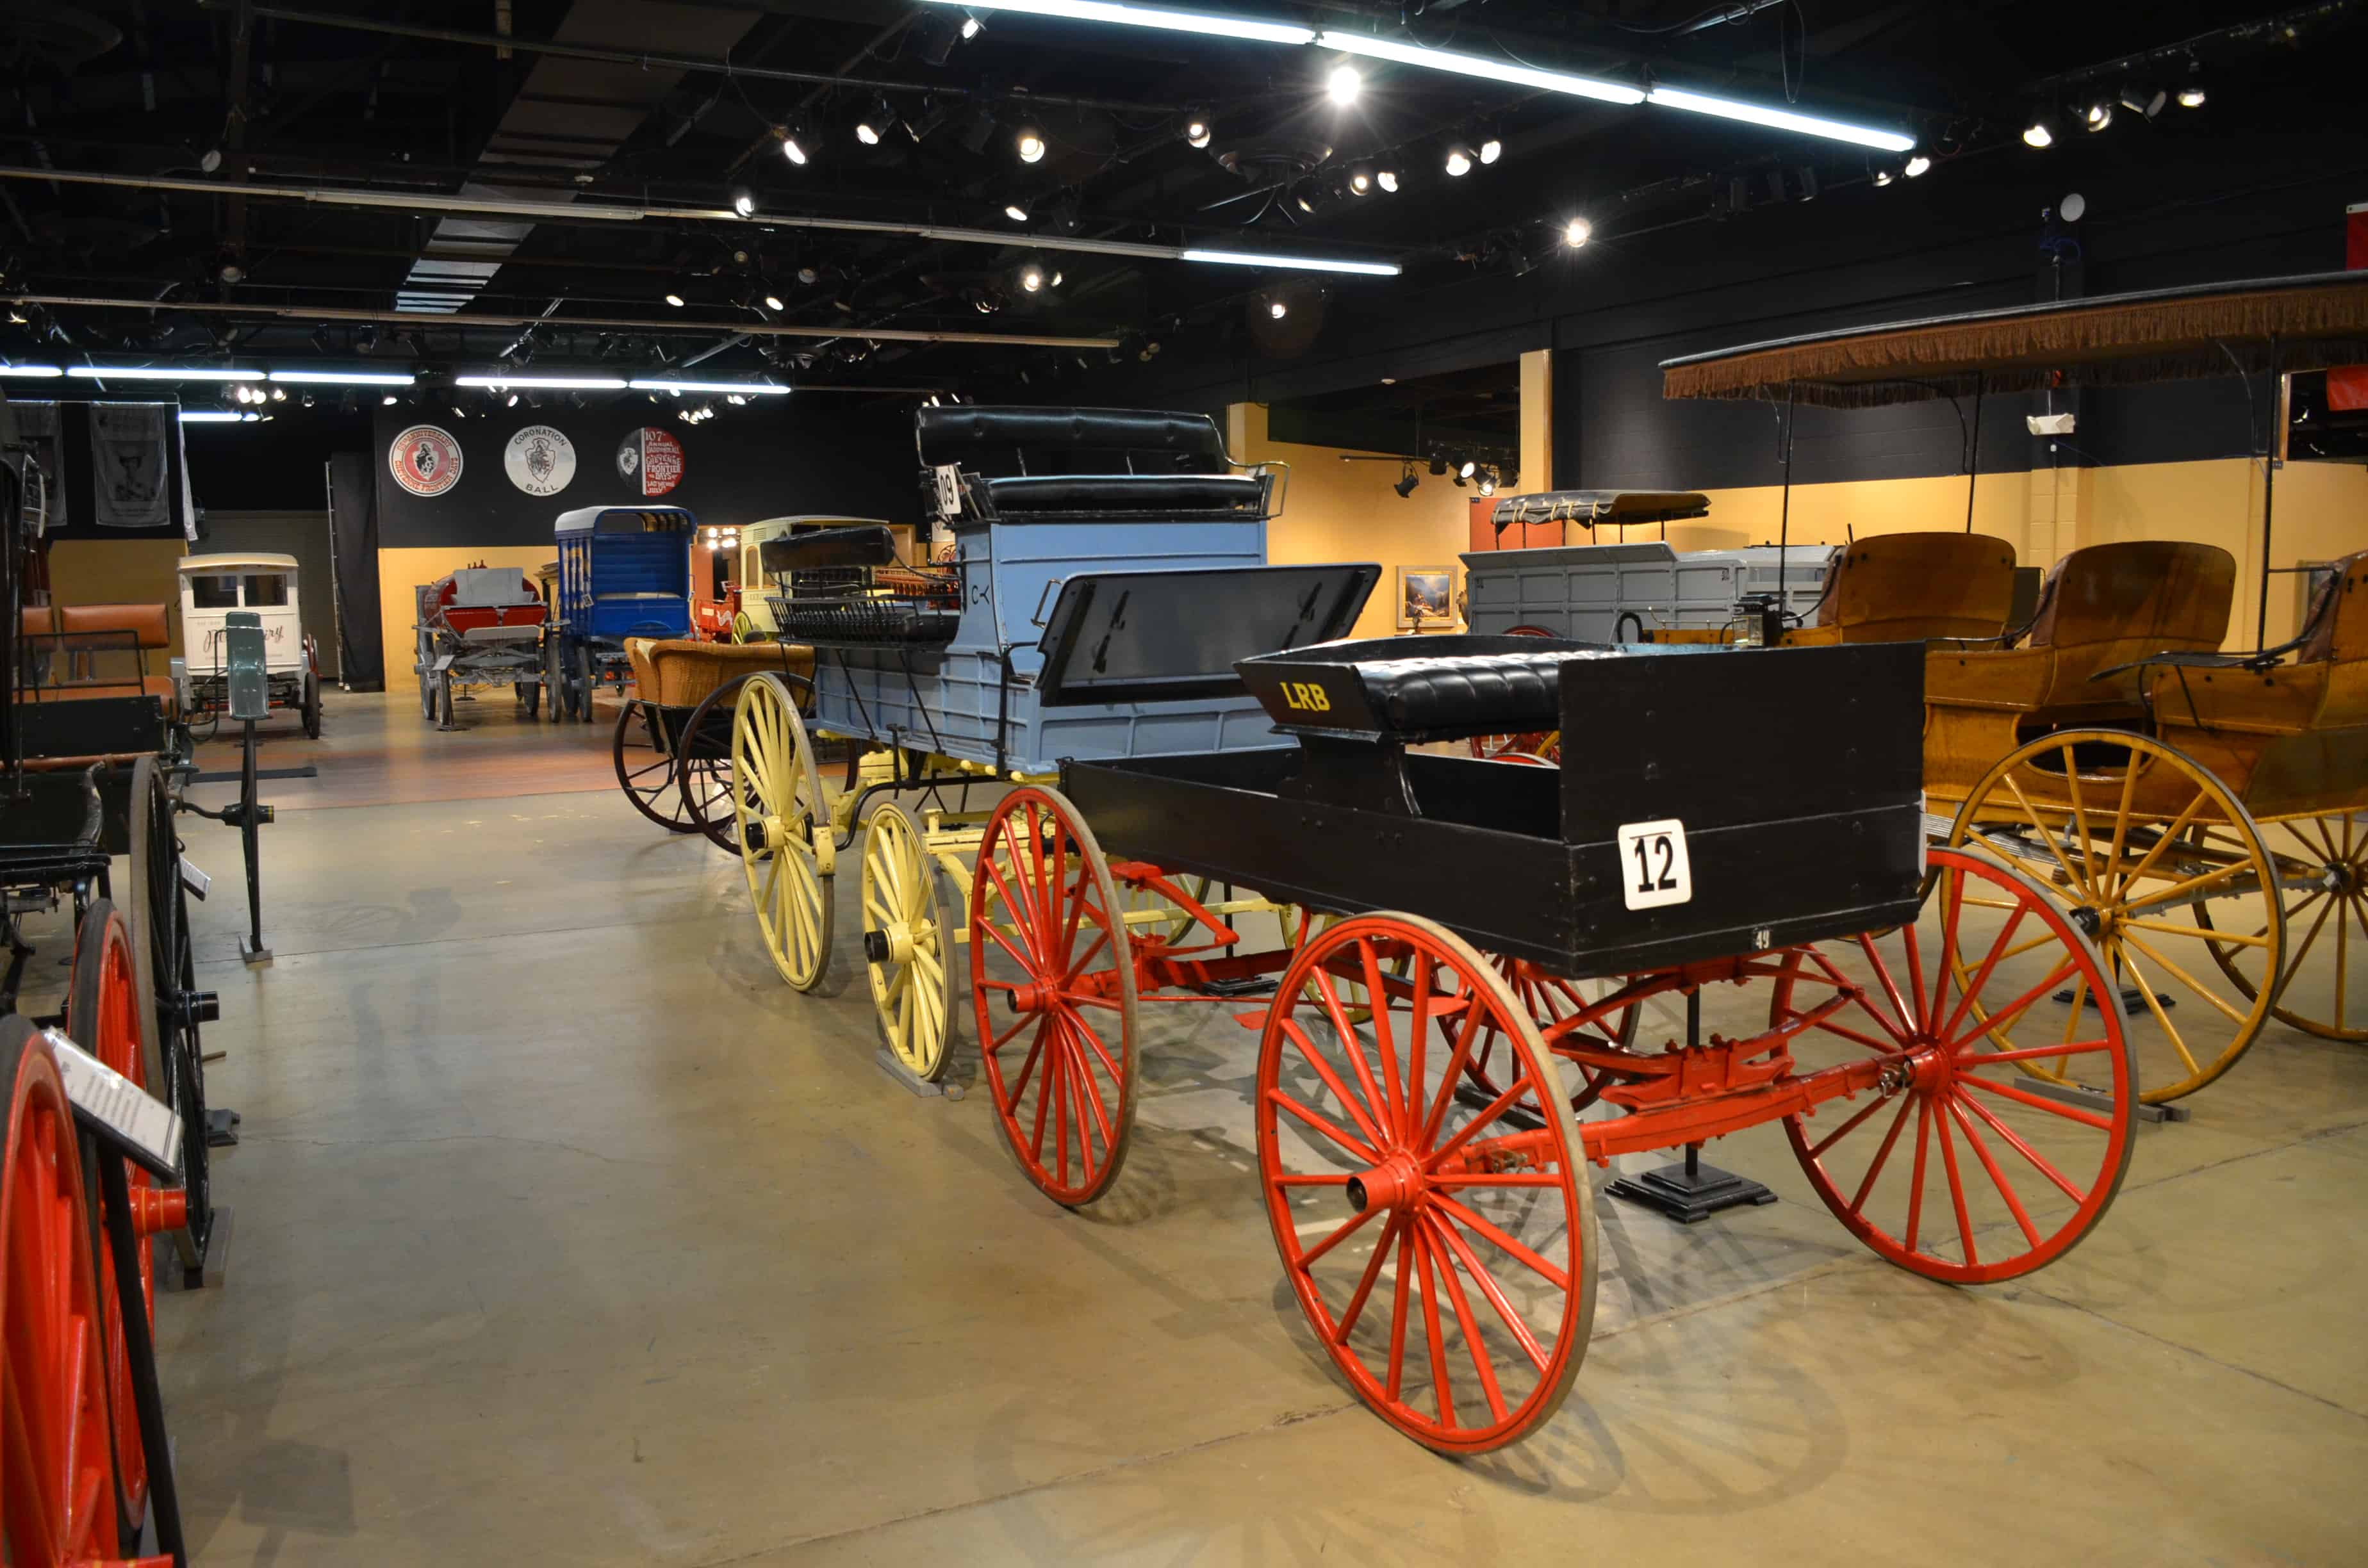 Carriage collection at the Cheyenne Frontier Days Old West Museum in Wyoming